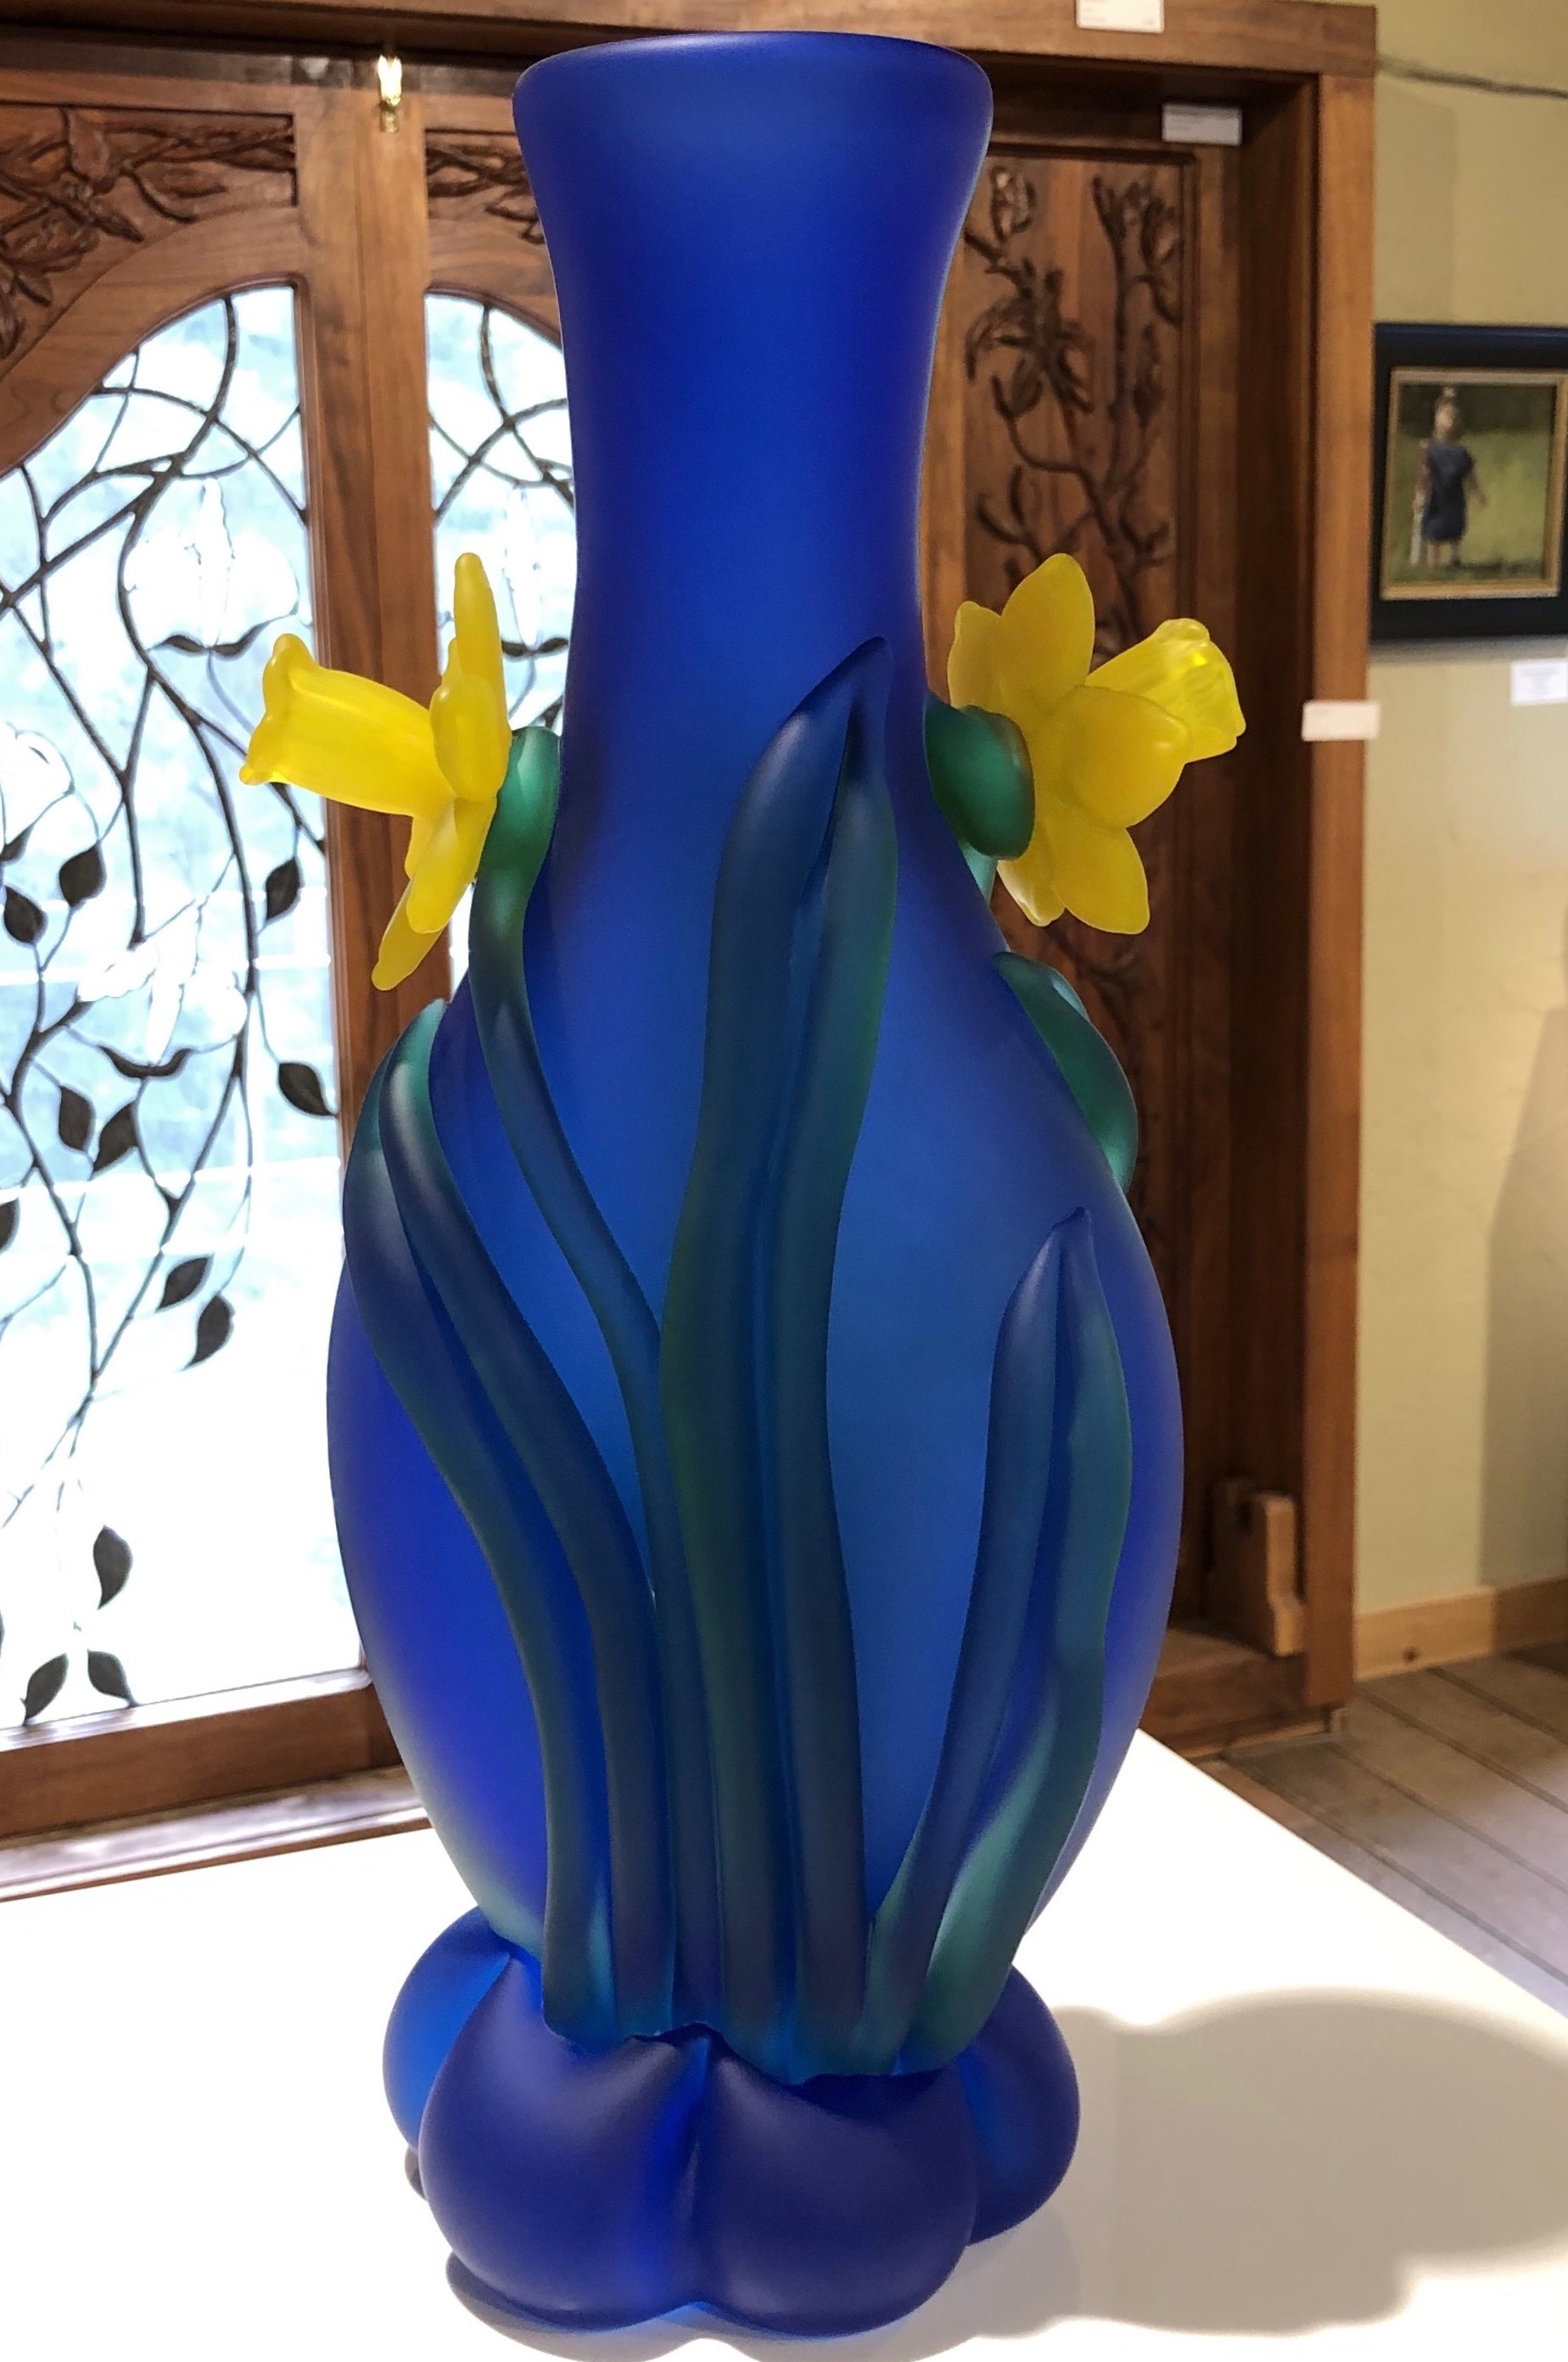 Cobalt Vase with Yellow Daffodils